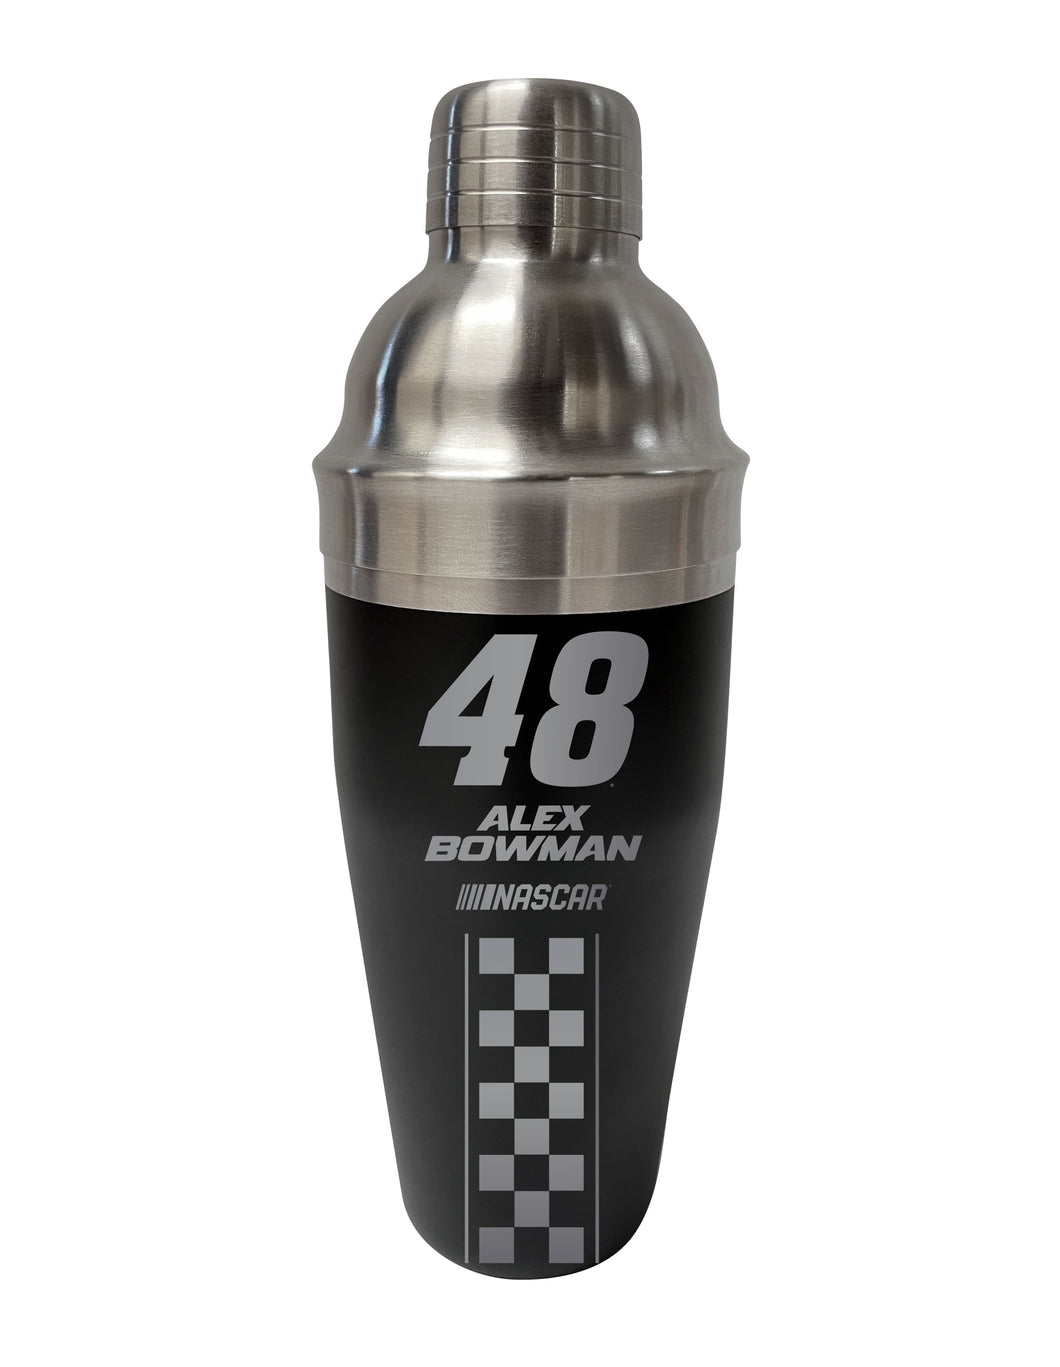 #48 Alex Bowman NASCAR Officially Licensed Cocktail Shaker